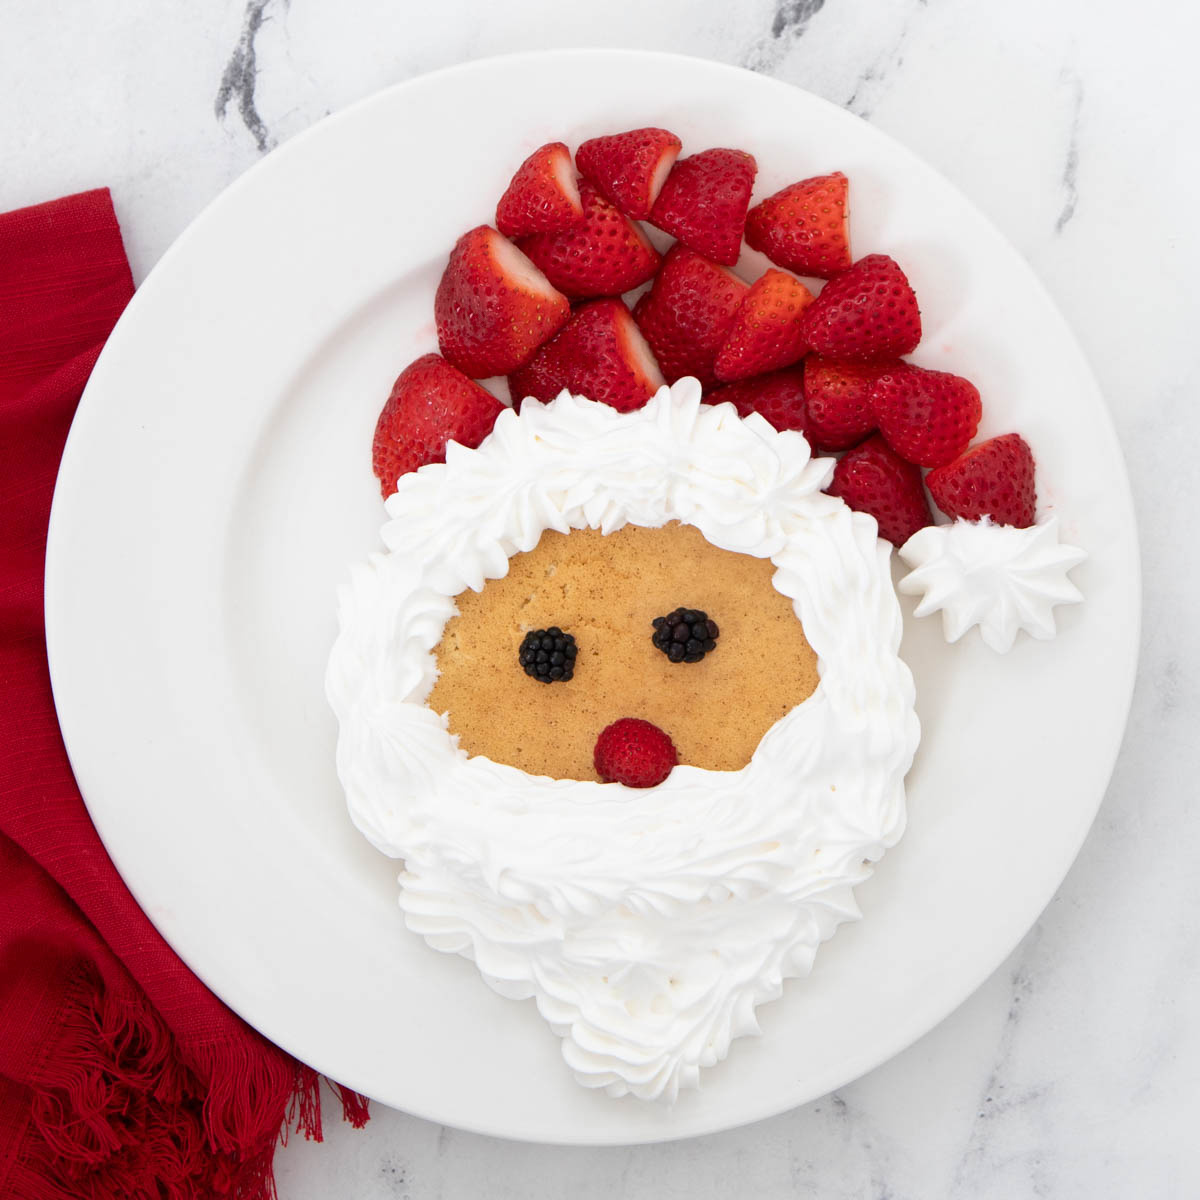 A plate with a santa face pancake and strawberries on it.